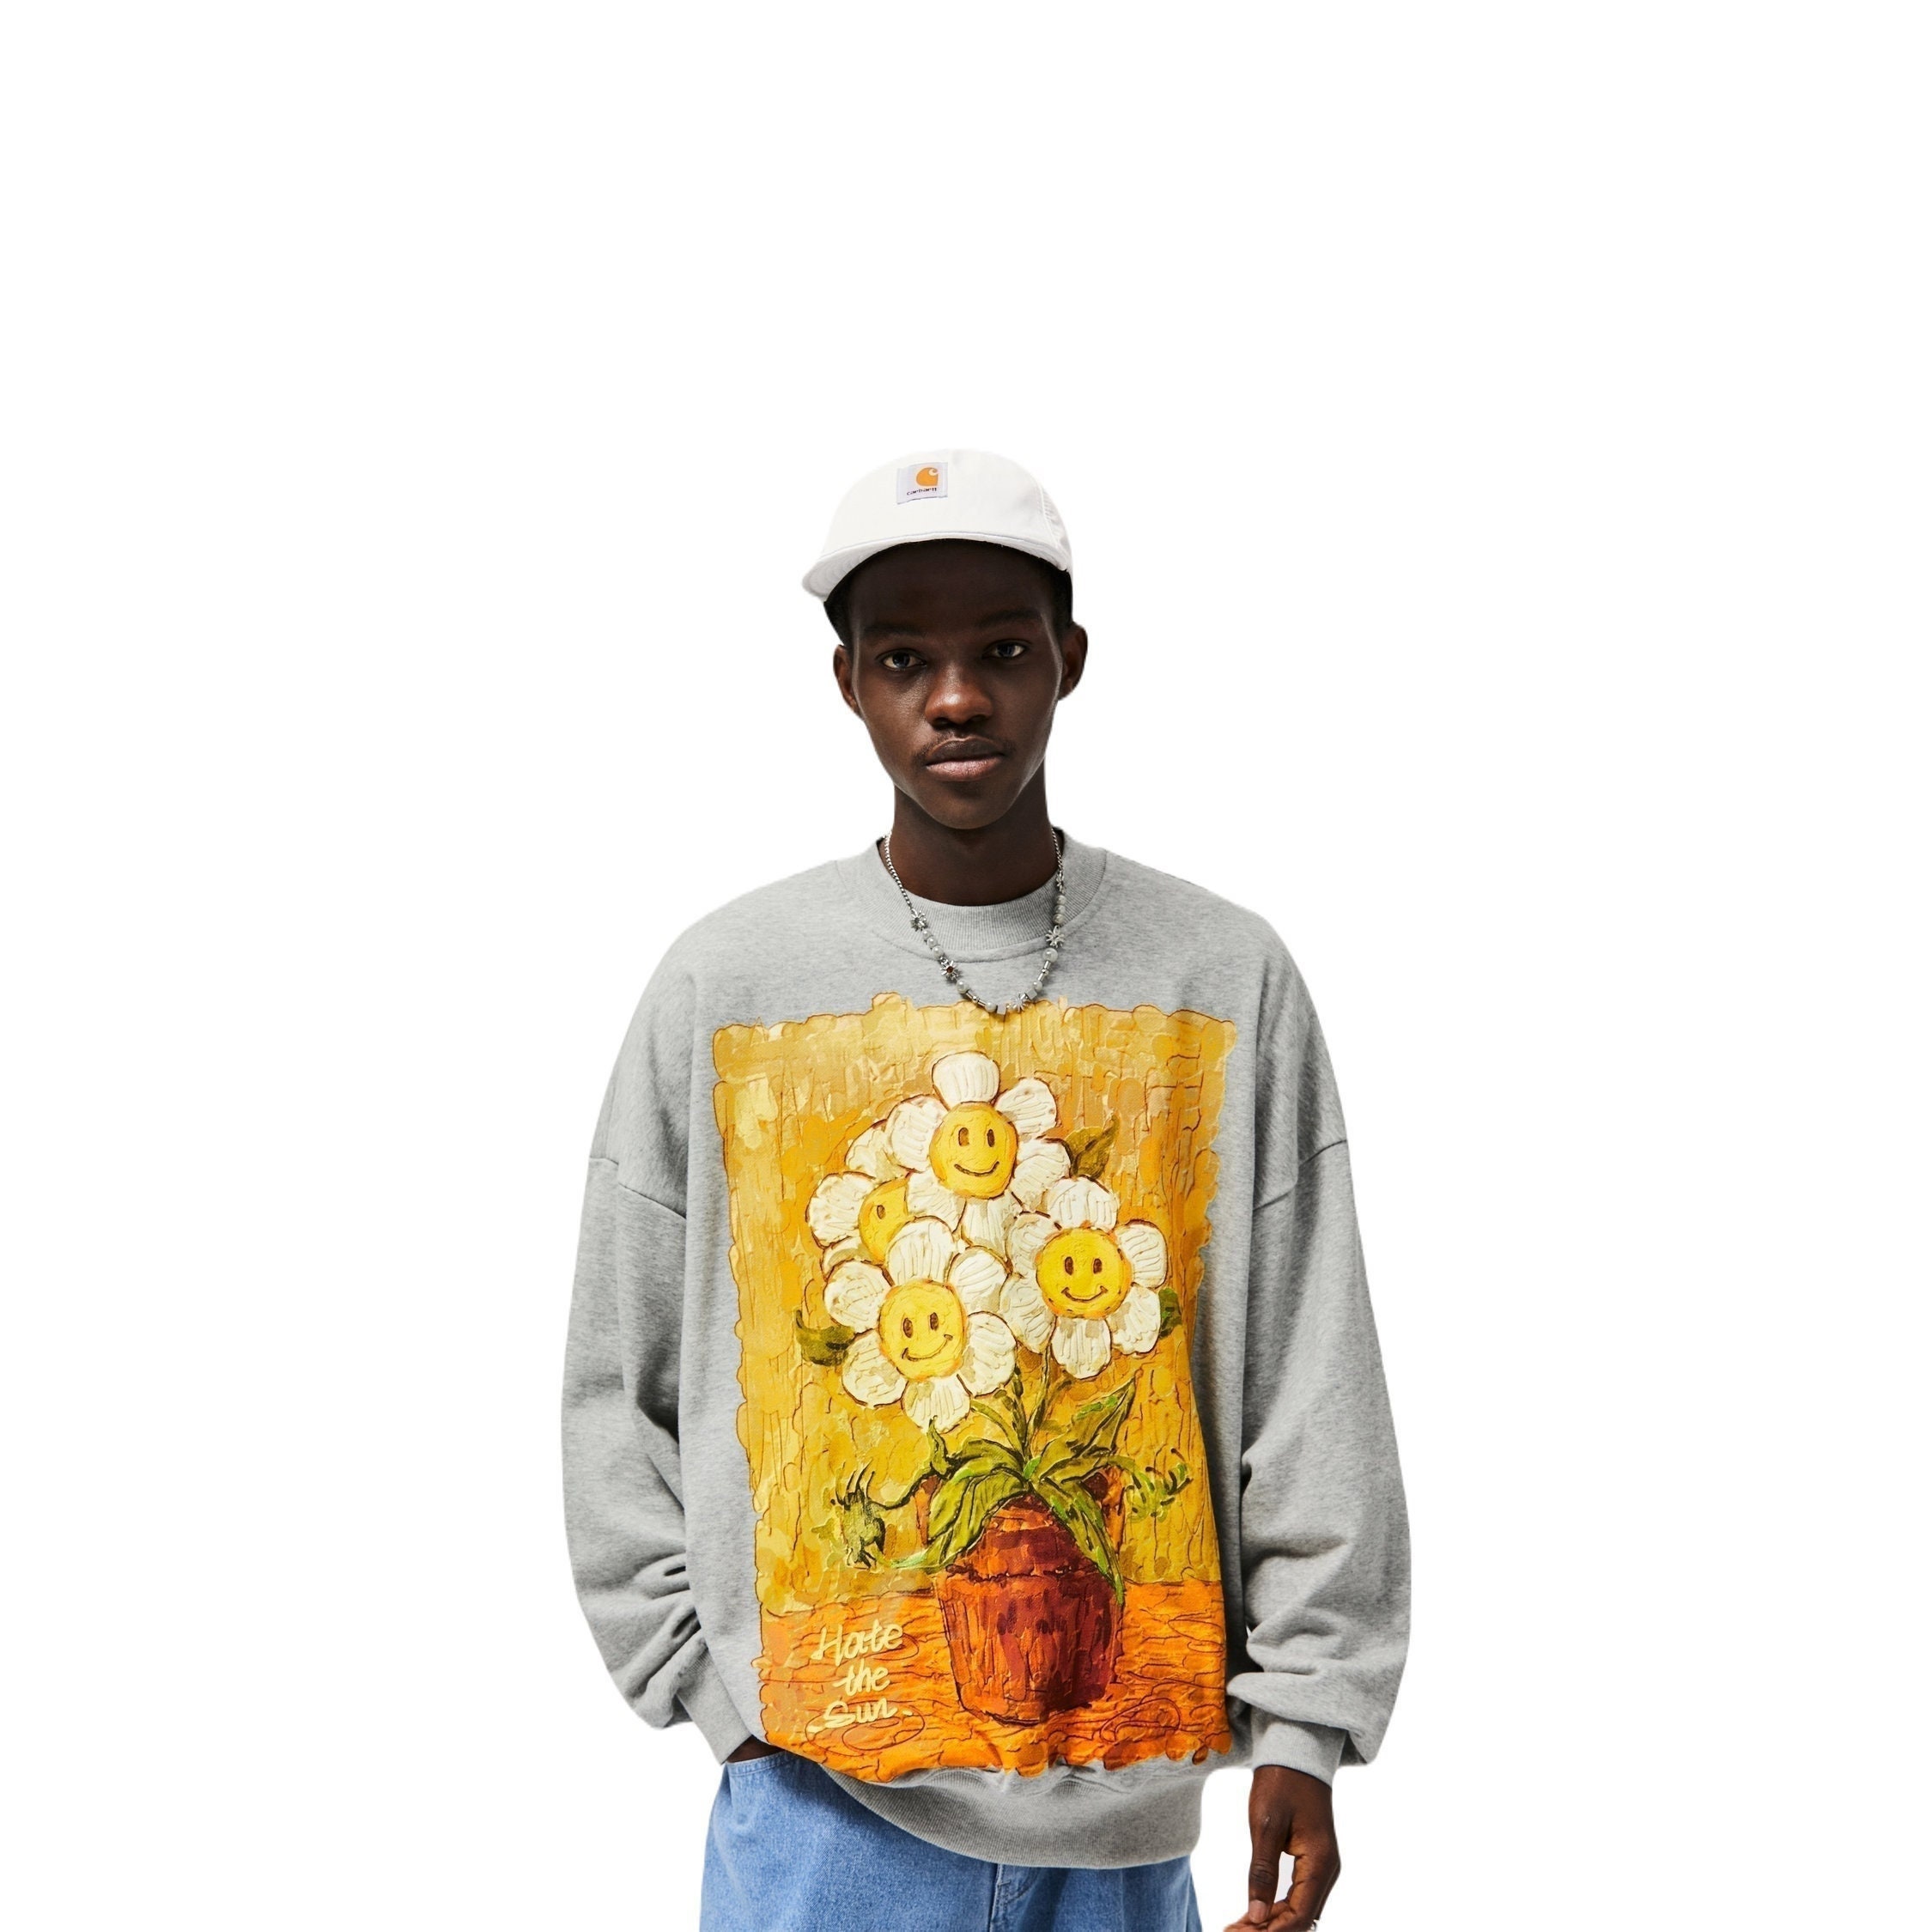 Streetwear Fashion Oil Painting Sunflower Printed Sweatshirt For Men Urban Long Sleeve Cotton Smiley Graphic Pullover